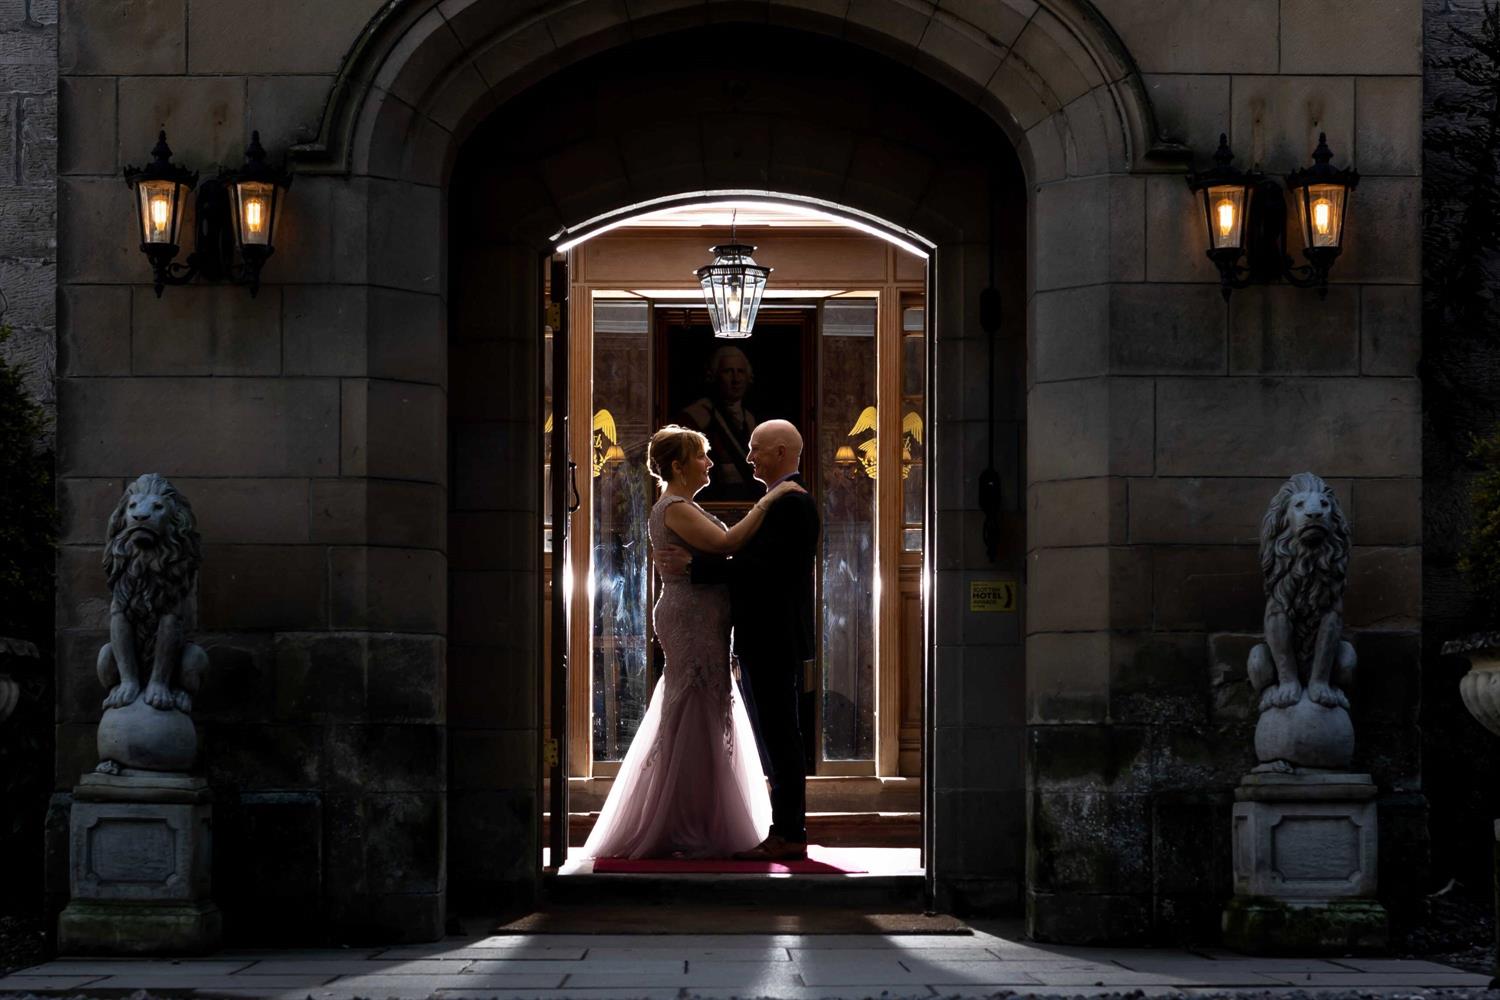 Bride and groom at the castle's entrance